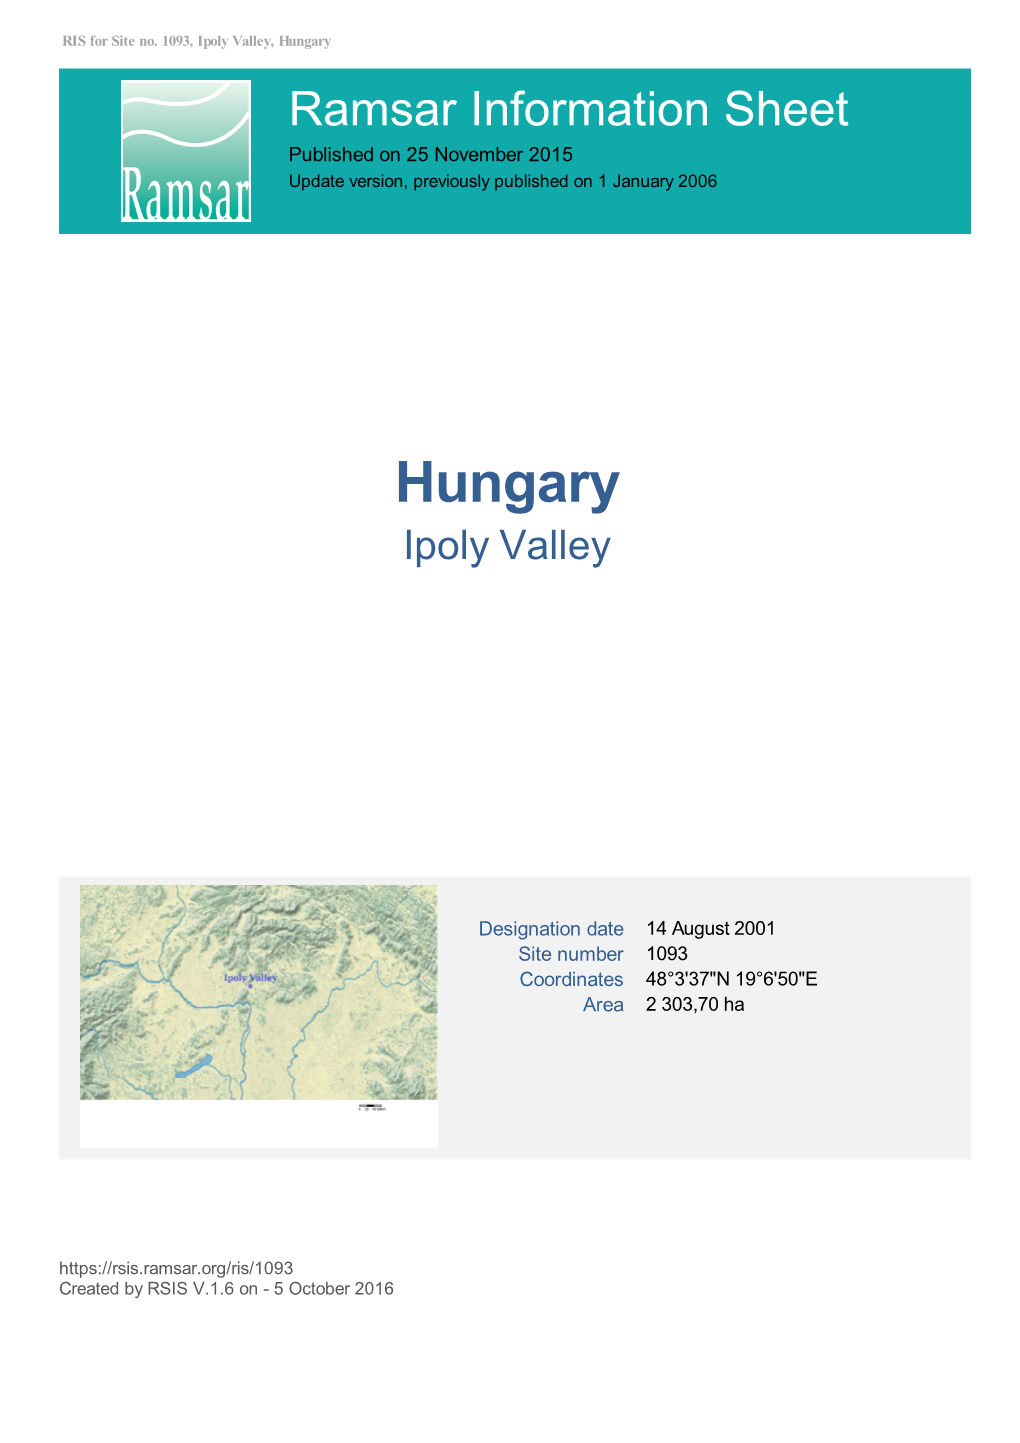 Hungary Ramsar Information Sheet Published on 25 November 2015 Update Version, Previously Published on 1 January 2006